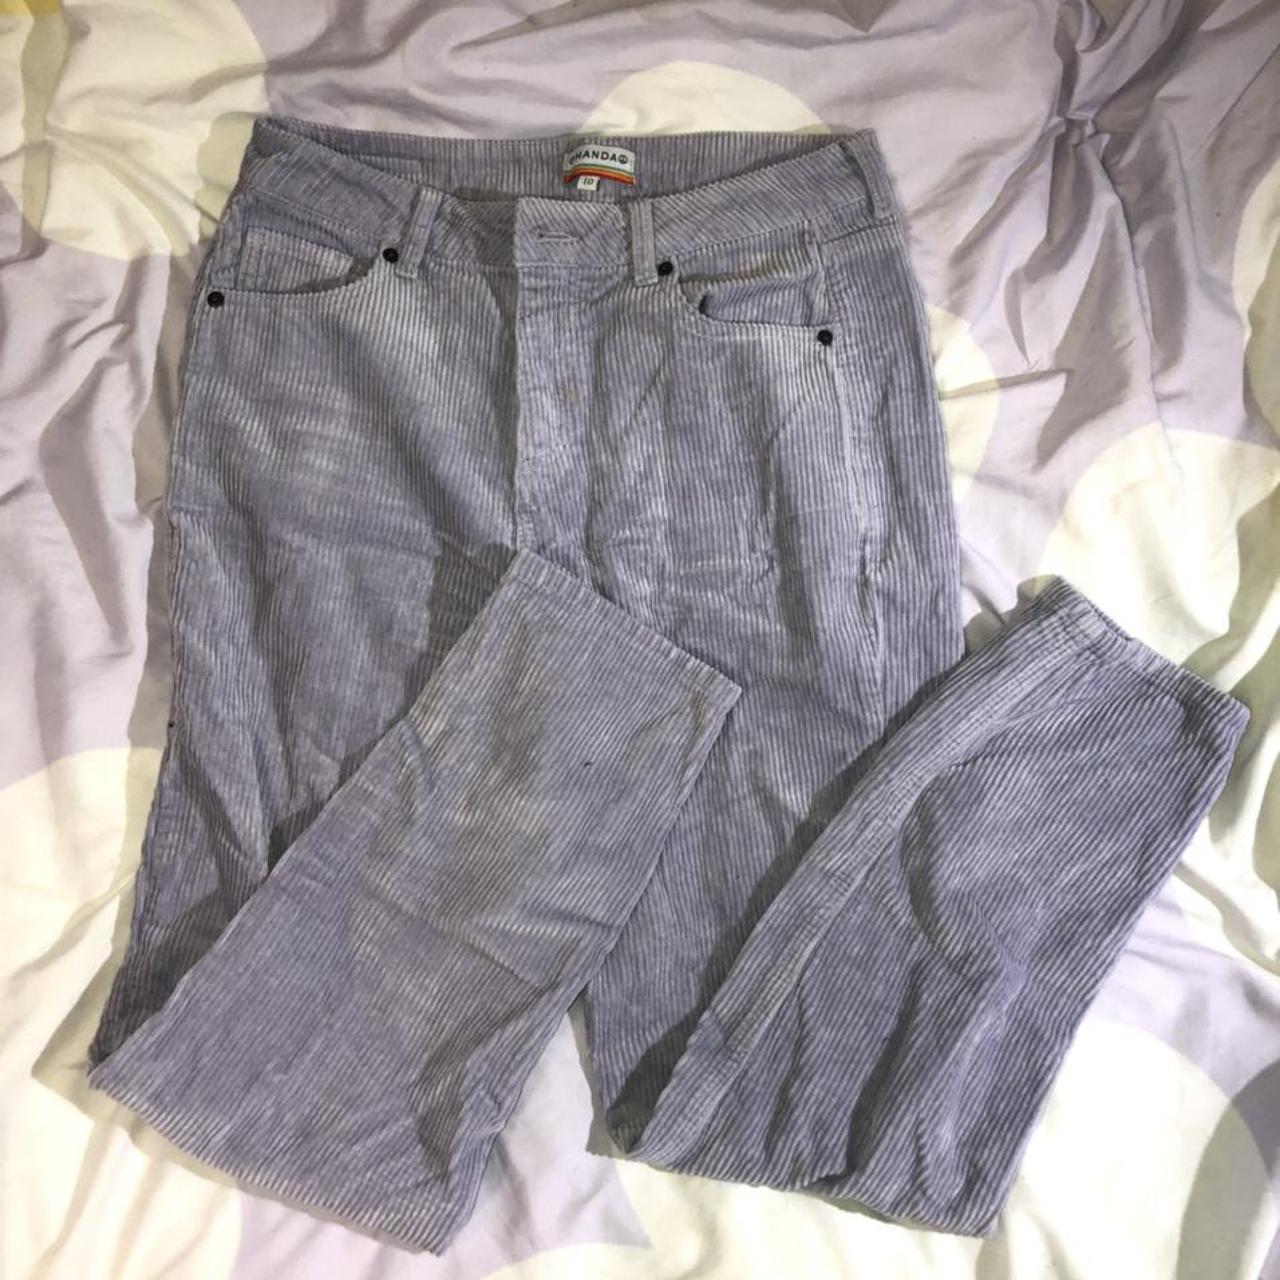 Ghanda purple lilac cord pants Relaxed fit, Size 10,... - Depop